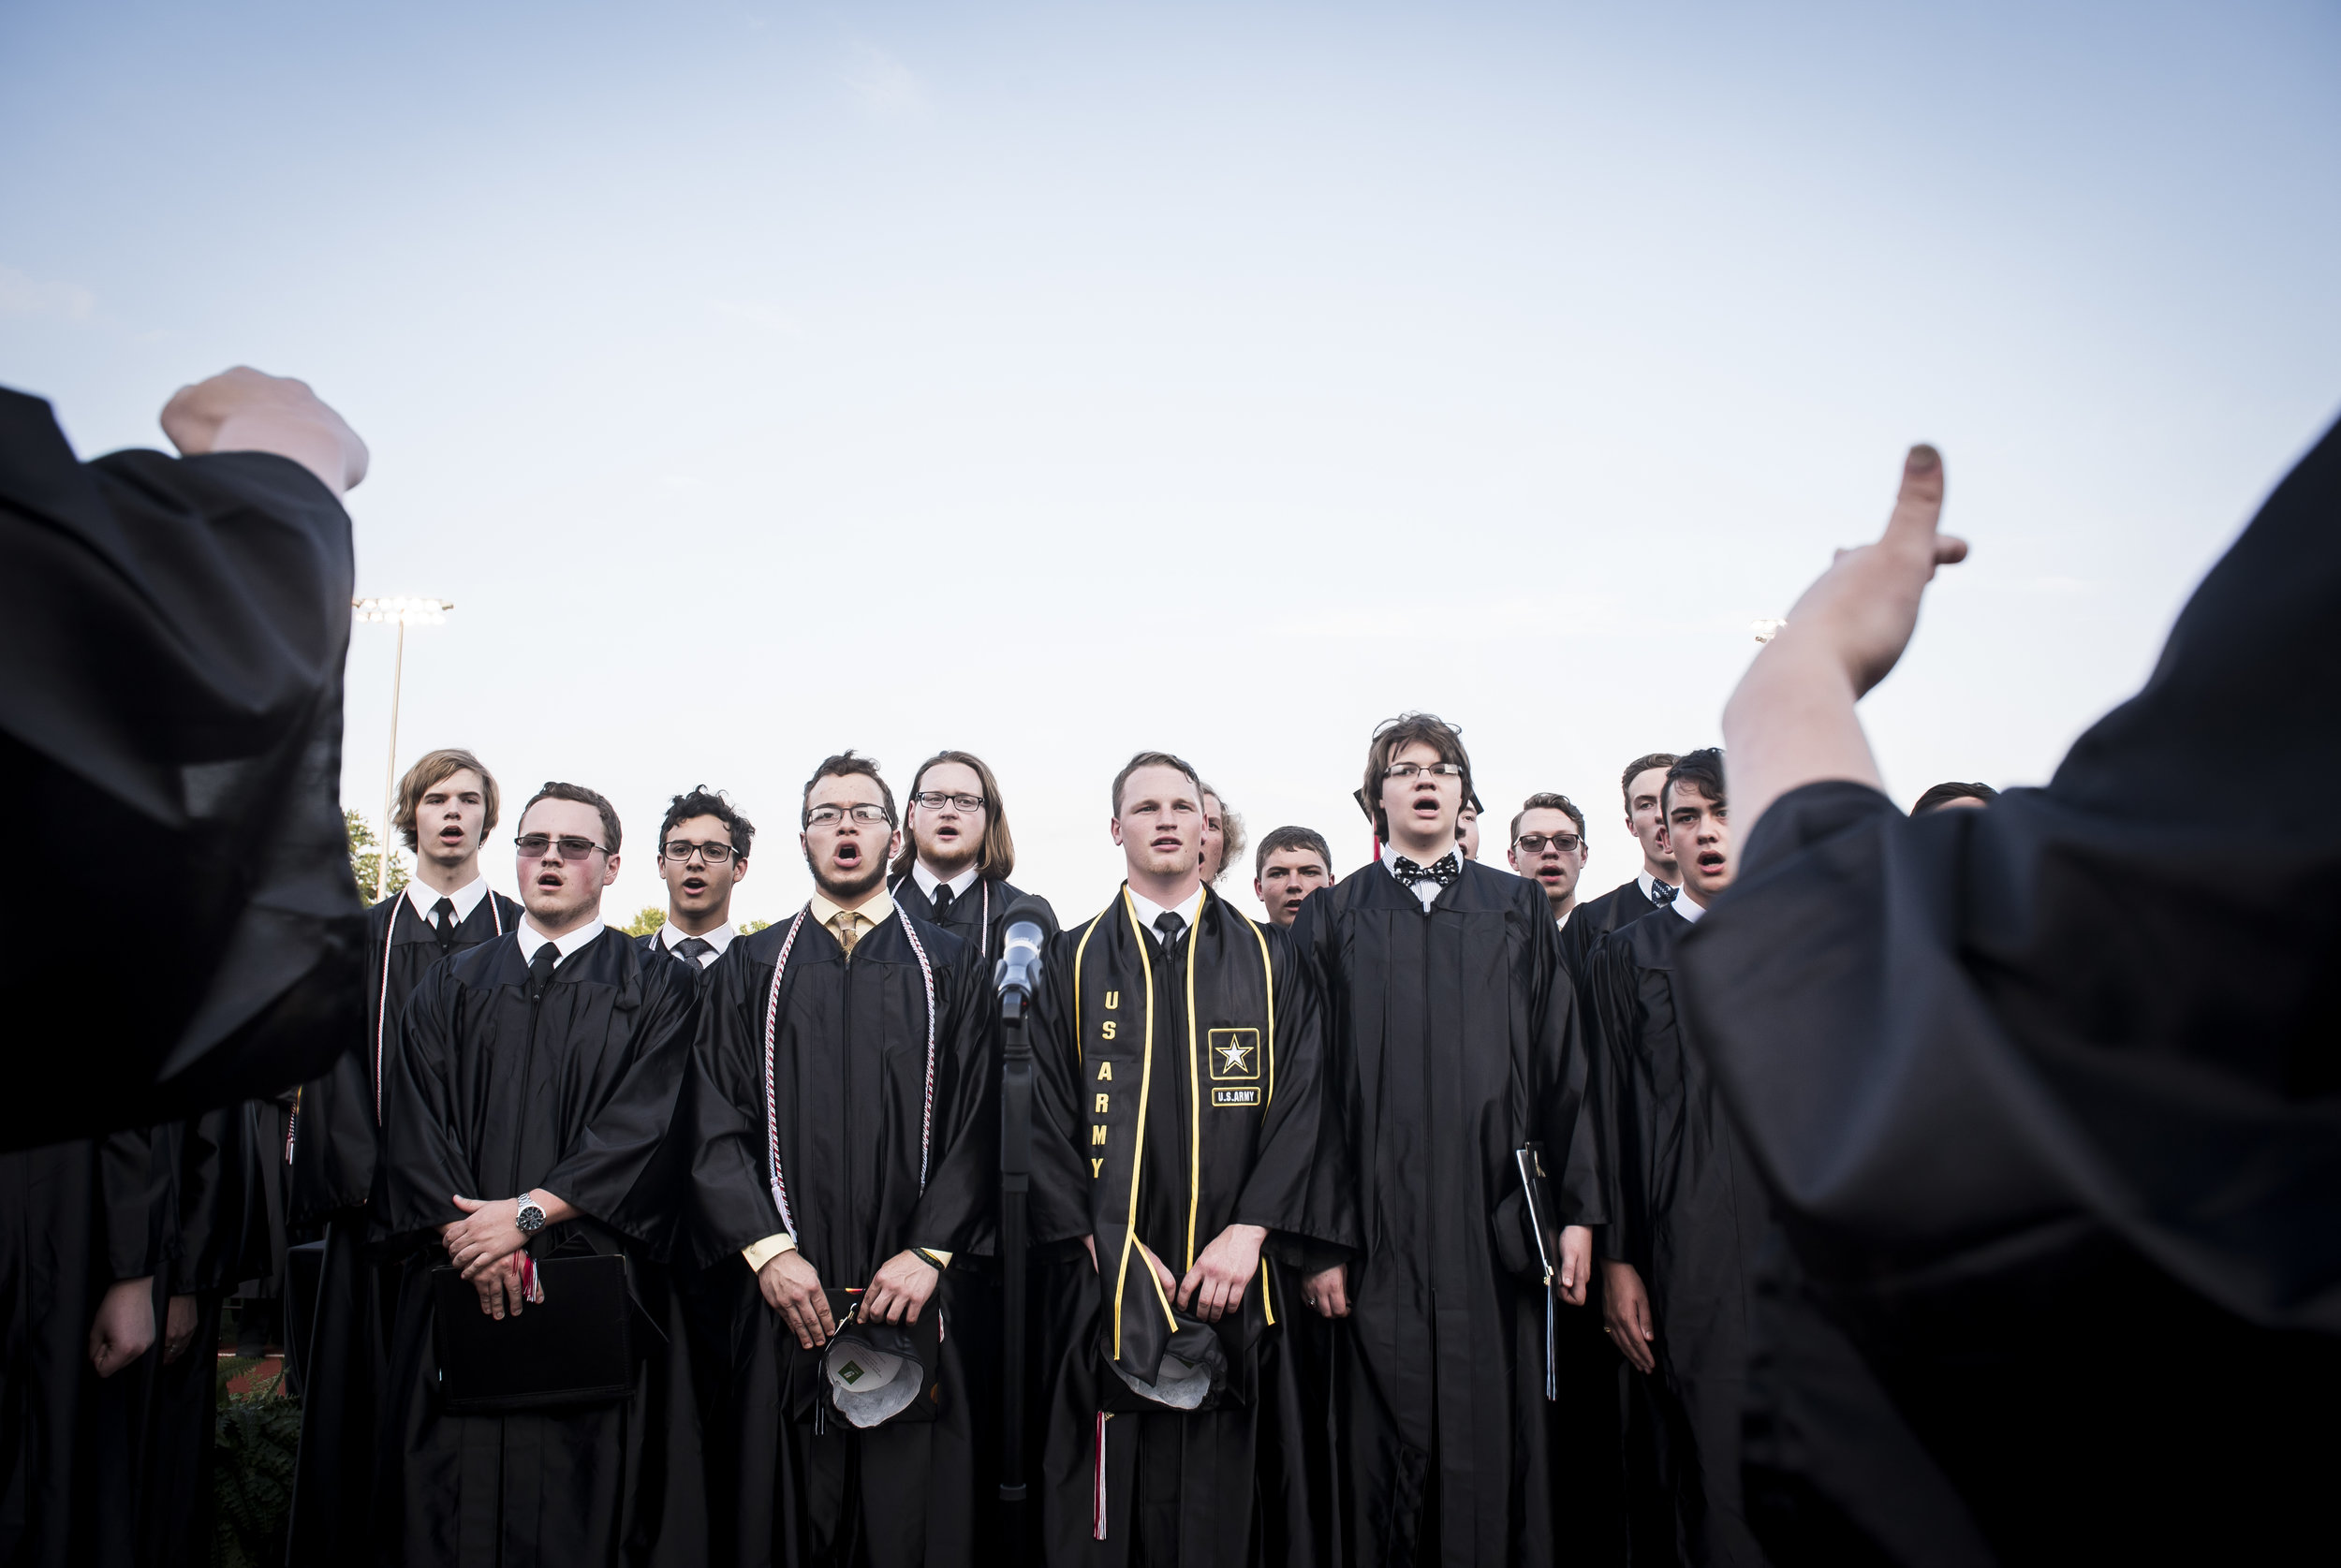  Kaiden Gaylord, center, sings the national anthem along with fellow senior choir members during South Western High School’s graduation ceremony. Gaylord’s post-graduation plan is to join the United States Army. 